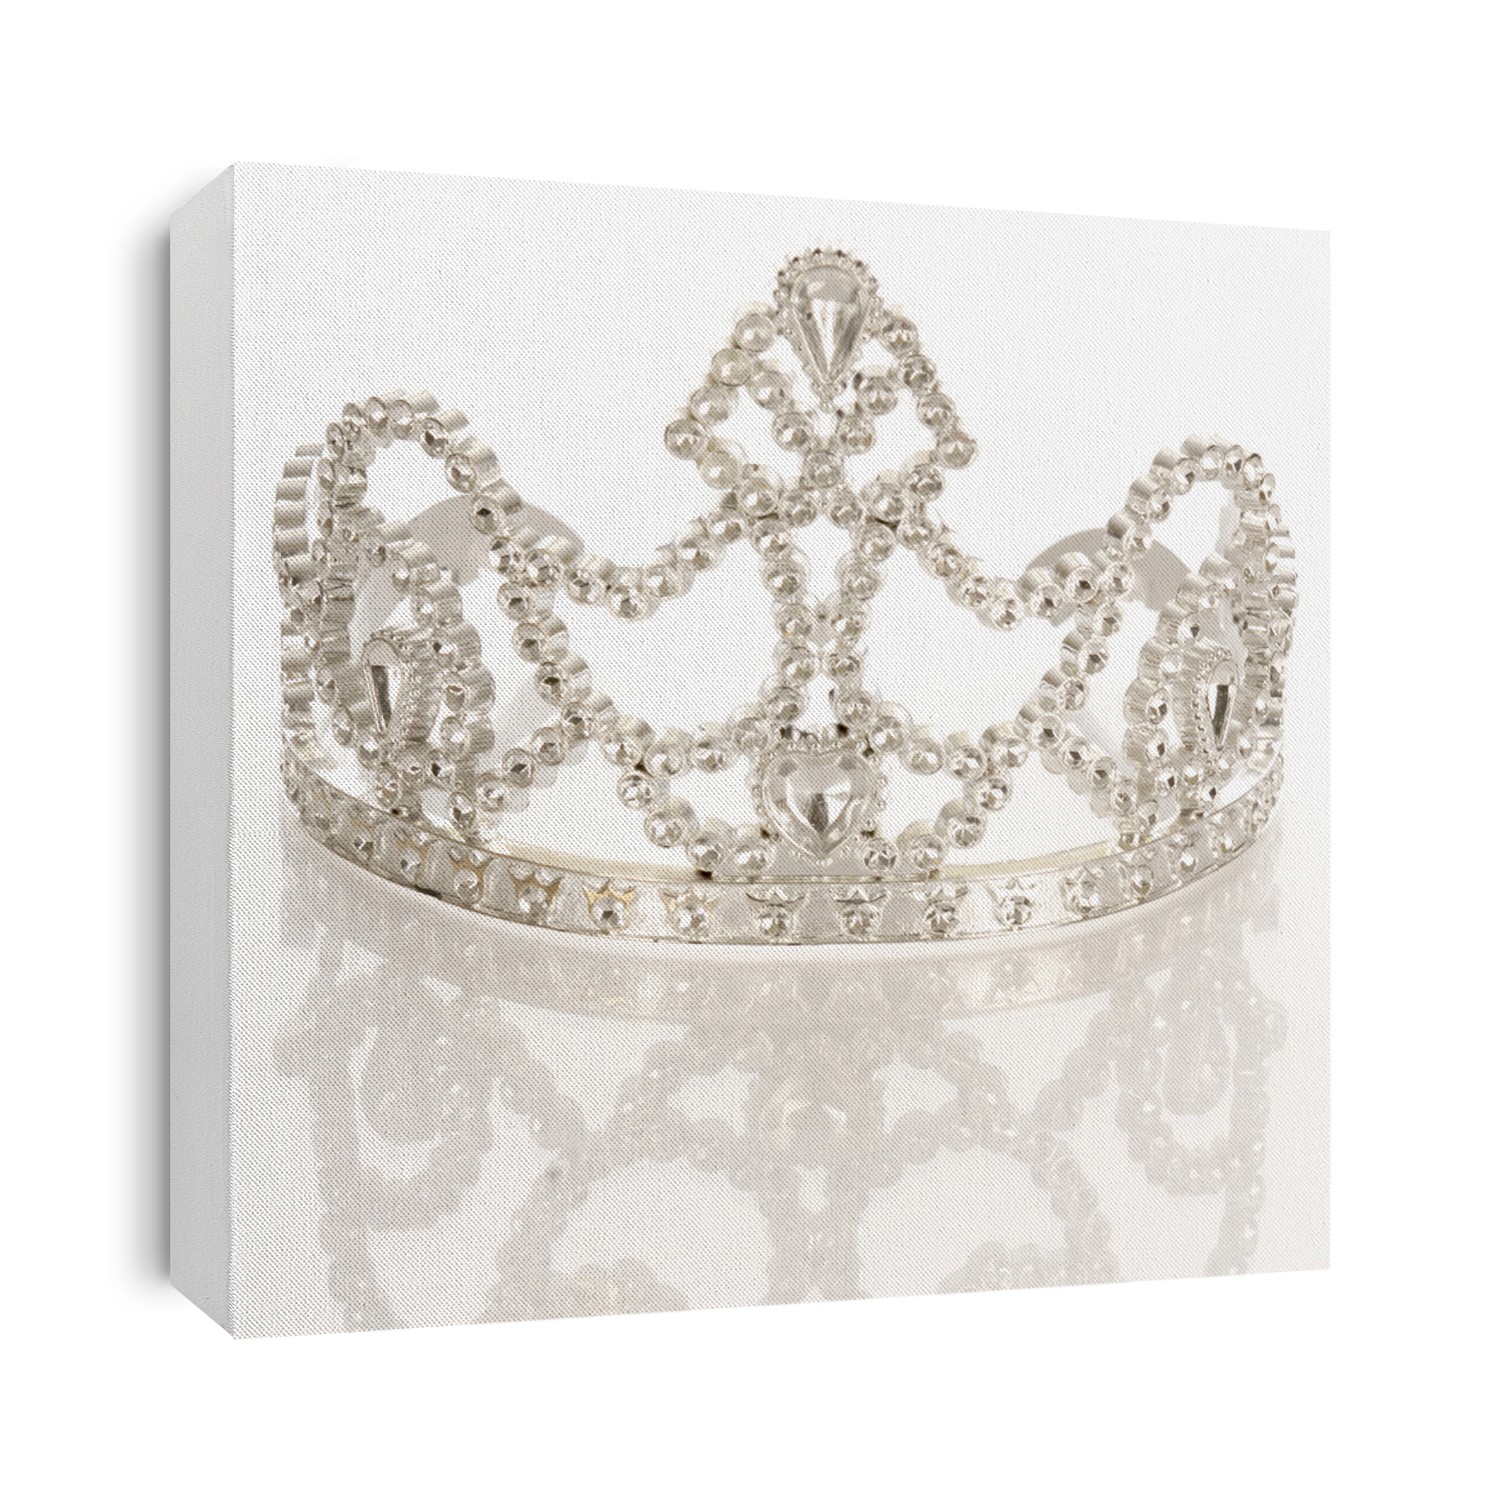 crown or tiara isolated on a white background with reflection